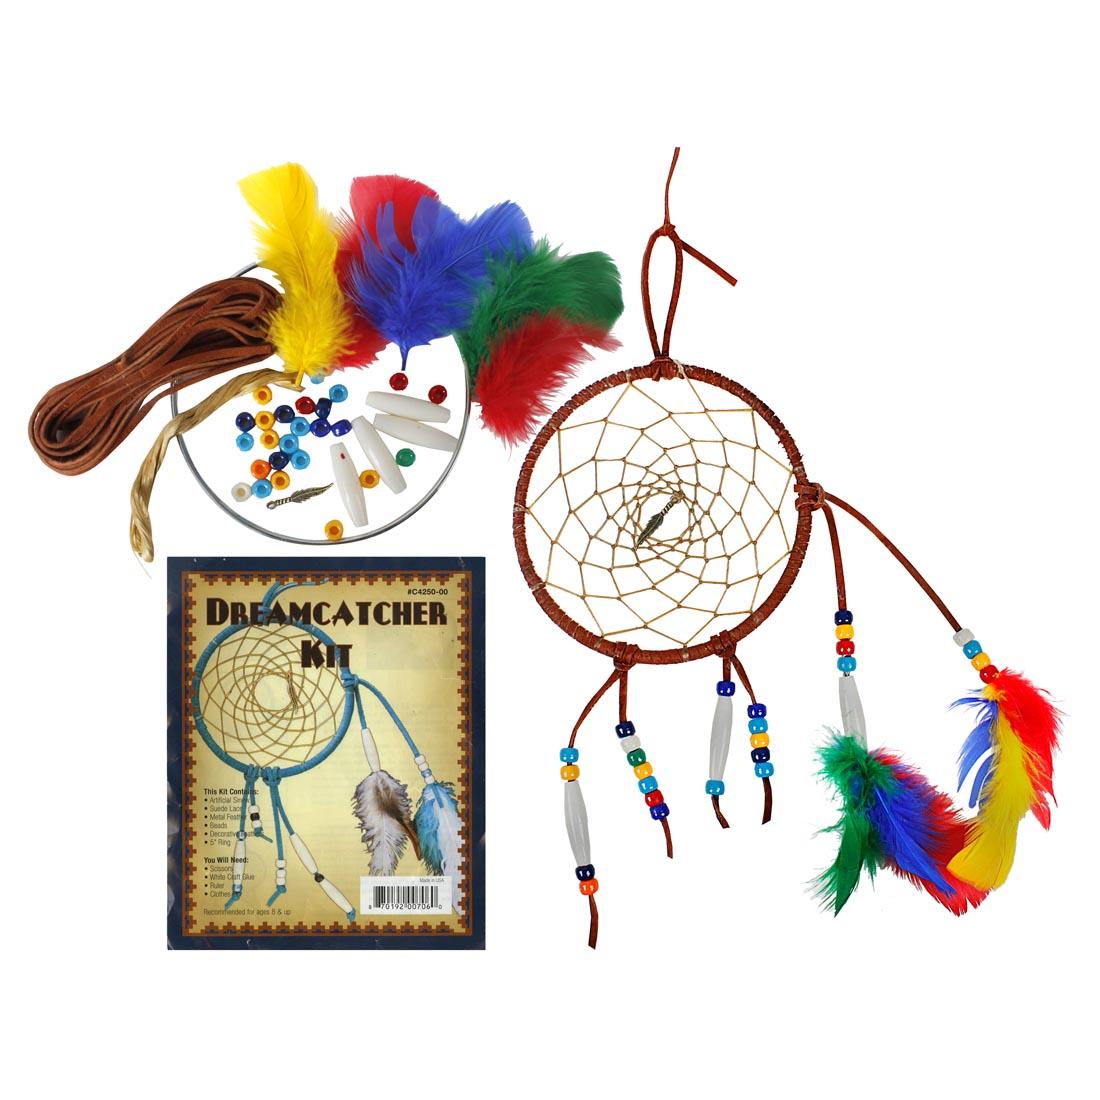 Dreamcatcher Kit package along with the pile of components as well as a completed dreamcatcher